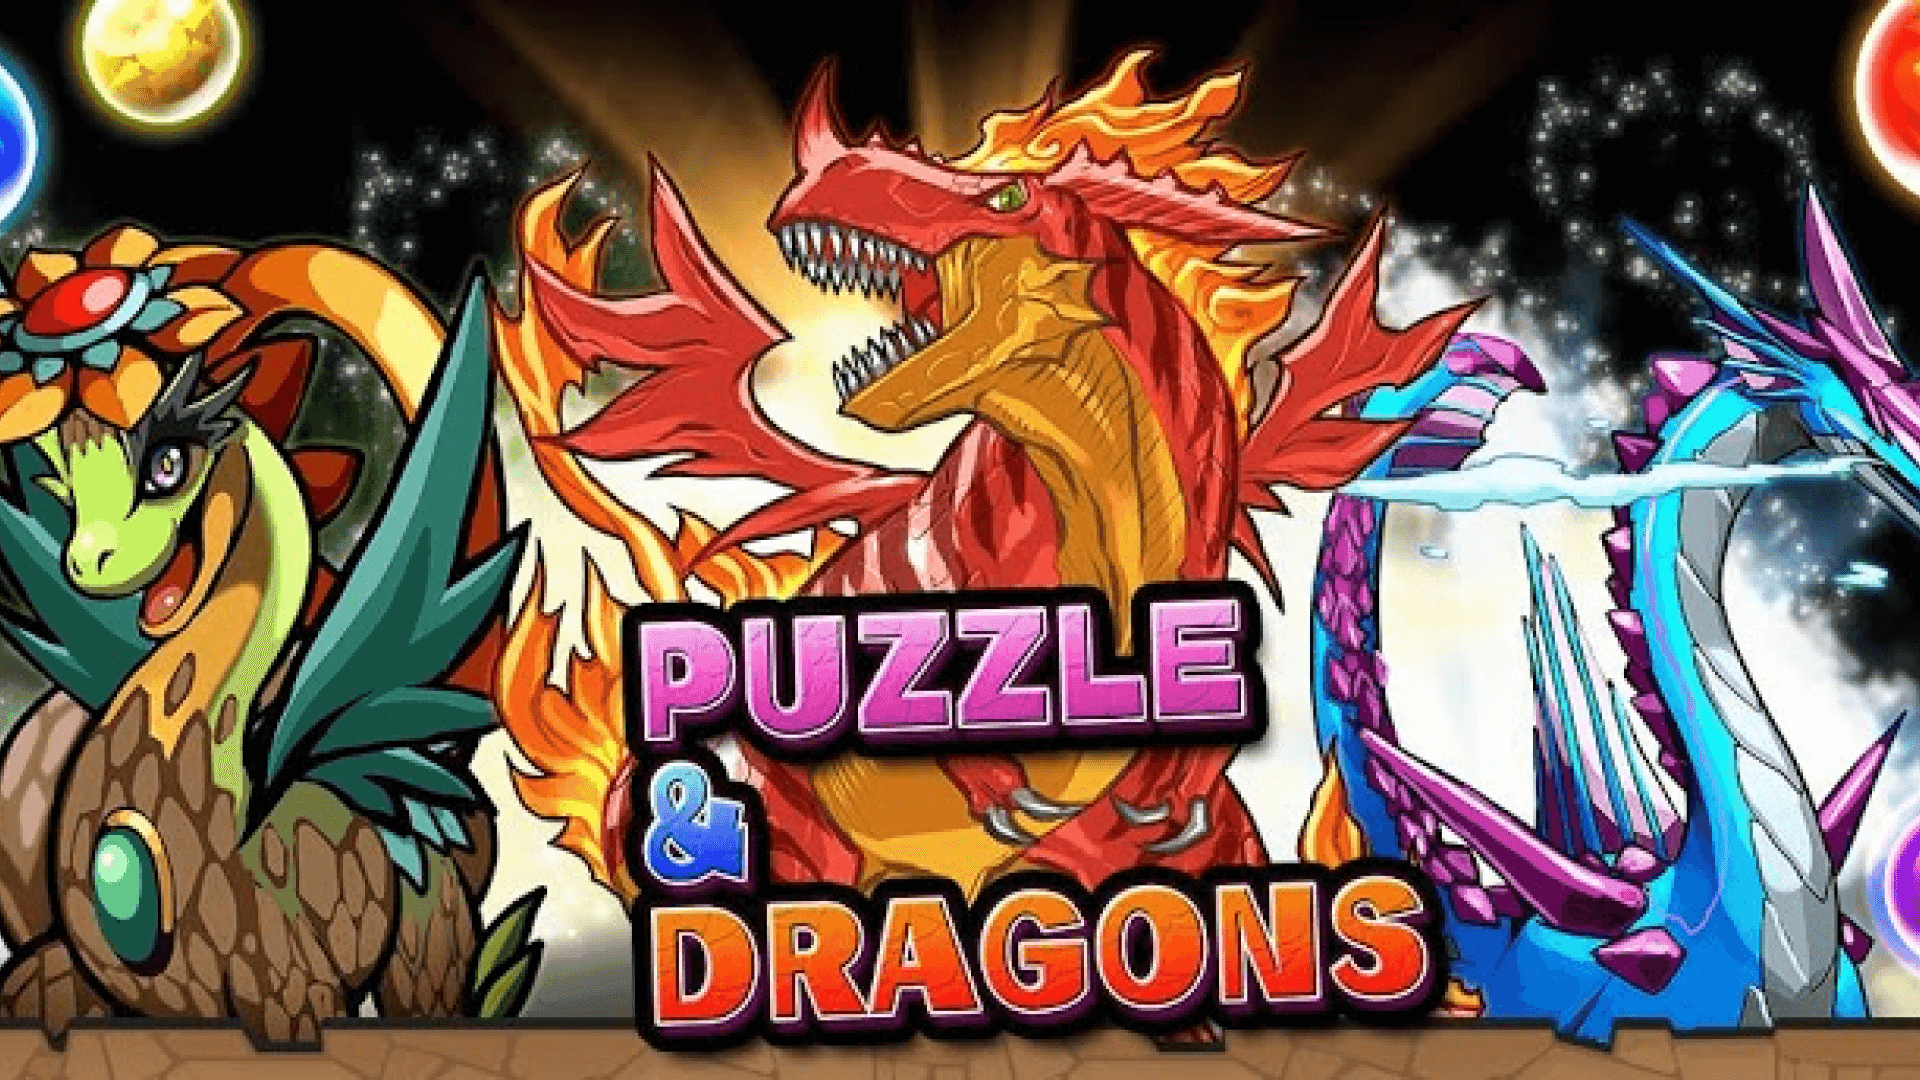 Puzzle & Dragons feature image